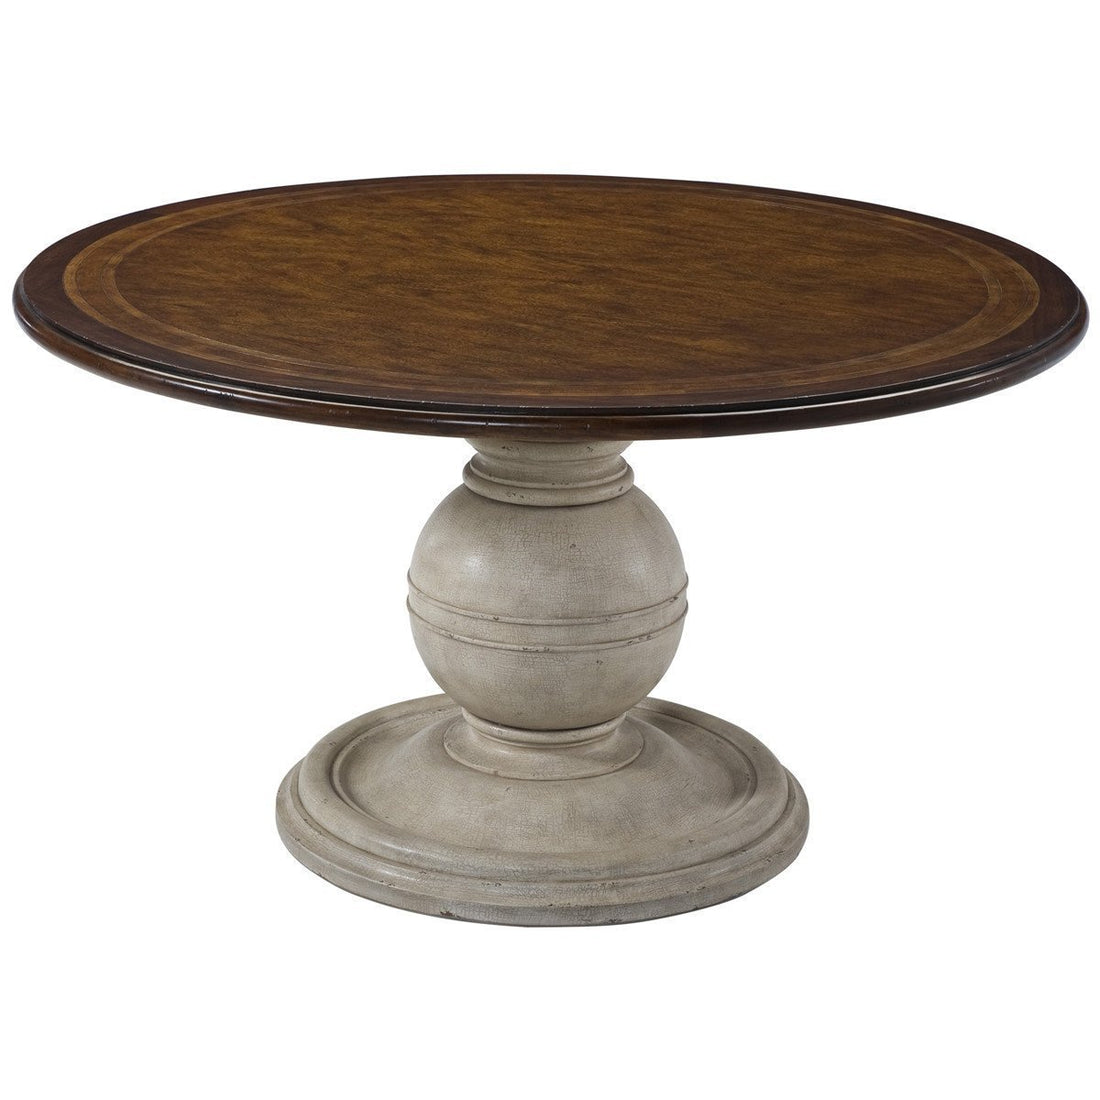 Theodore Alexander Brooksby Nicolet Dining Table